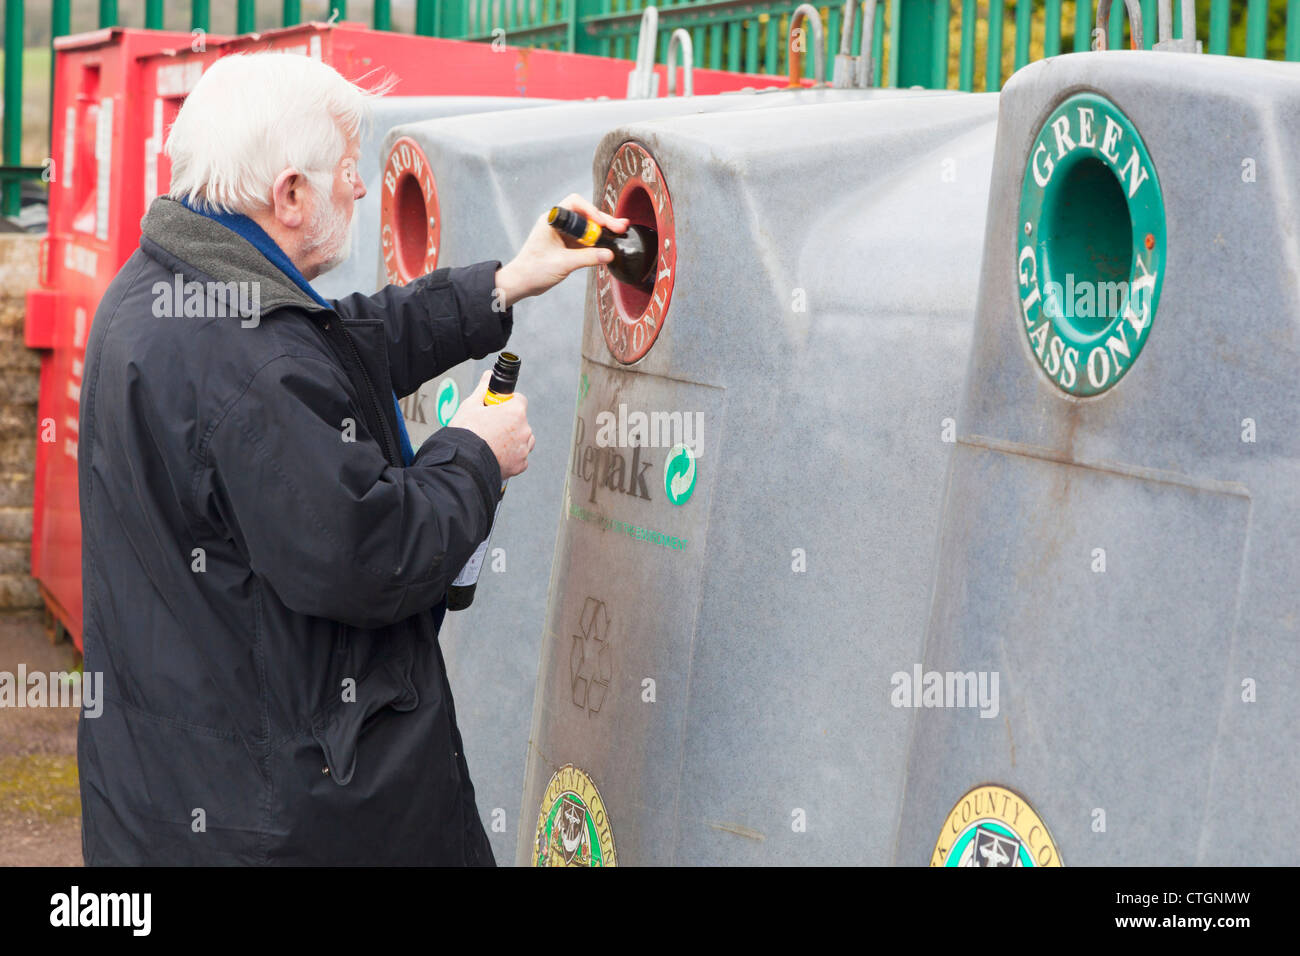 Dunmanyway, County Cork, Irland. Ältere Mann Tropfflaschen in Altglascontainer am Recyclinghof. Stockfoto